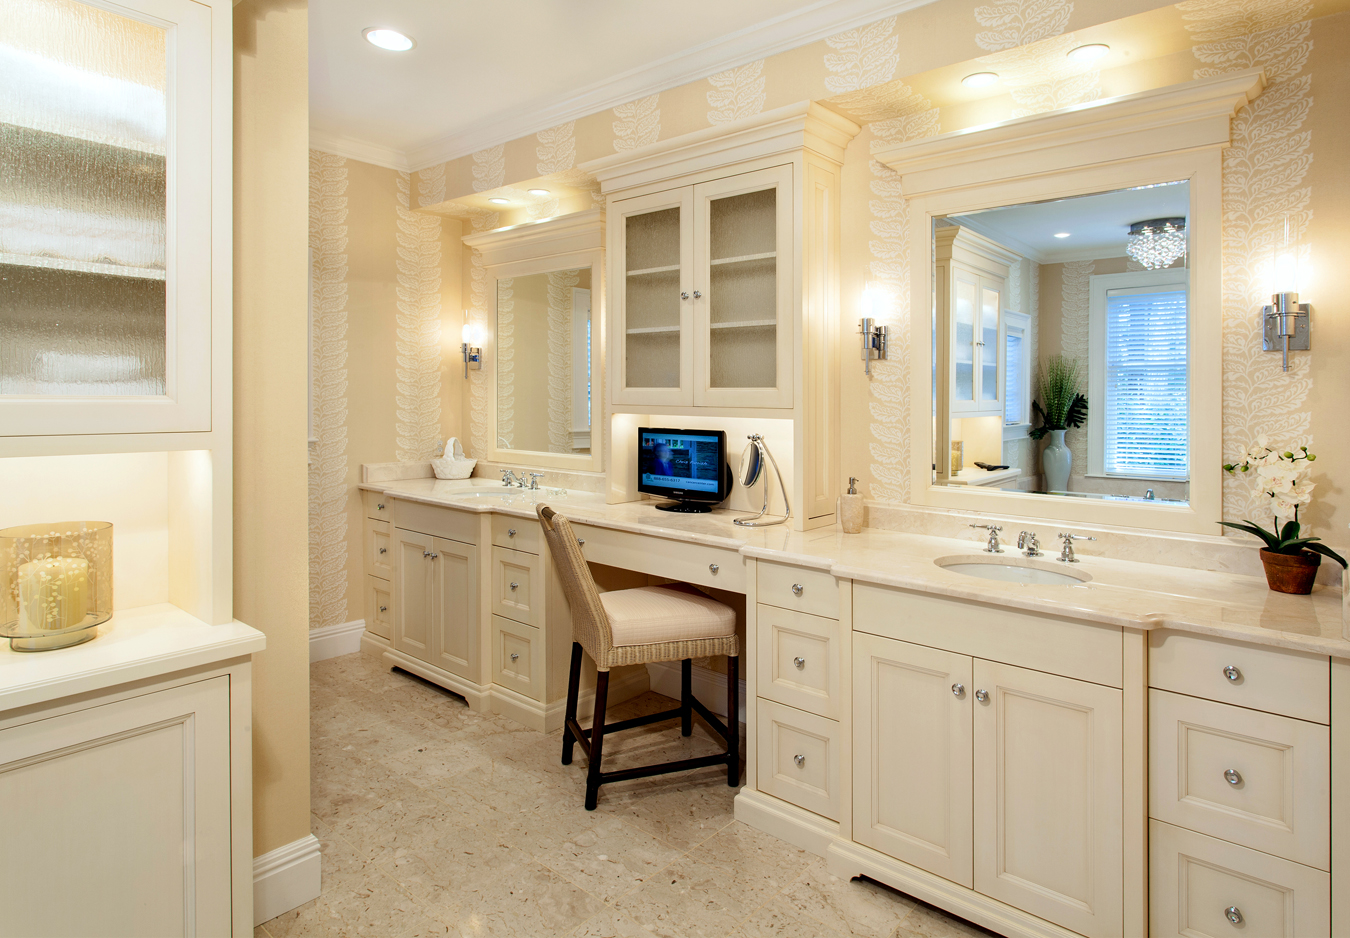 Lewis & Weldon Custom Cabinetry (Hyannis, MA) won first place in the Residential Bath category in the second annual PureBond® Quality Awards competition.